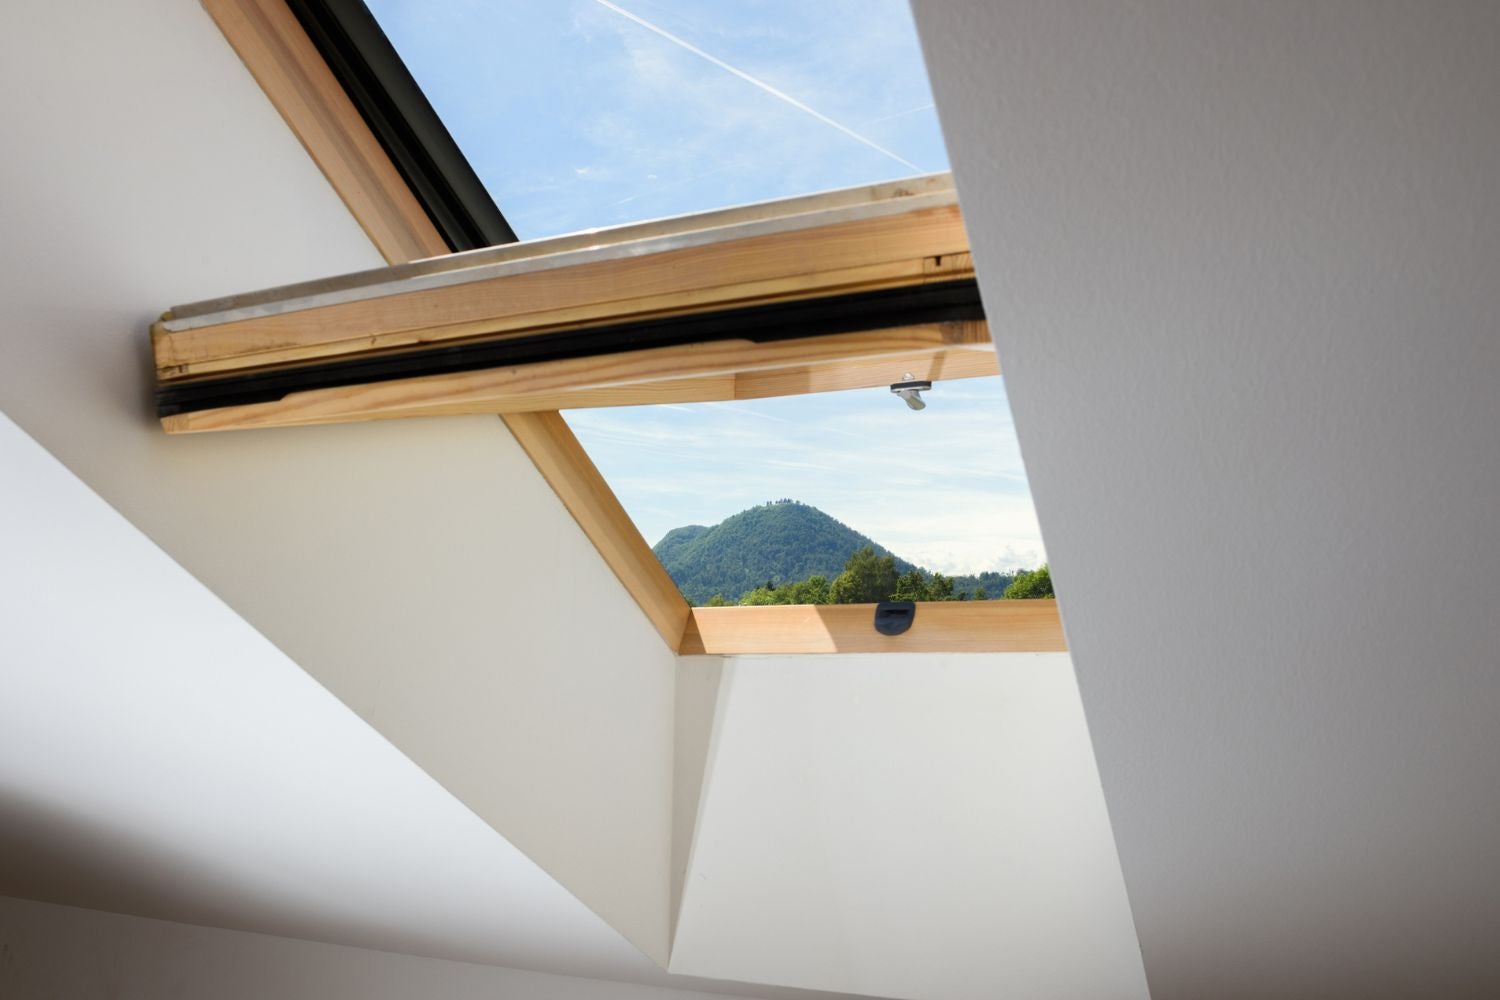 How Much Does Skylight Cost